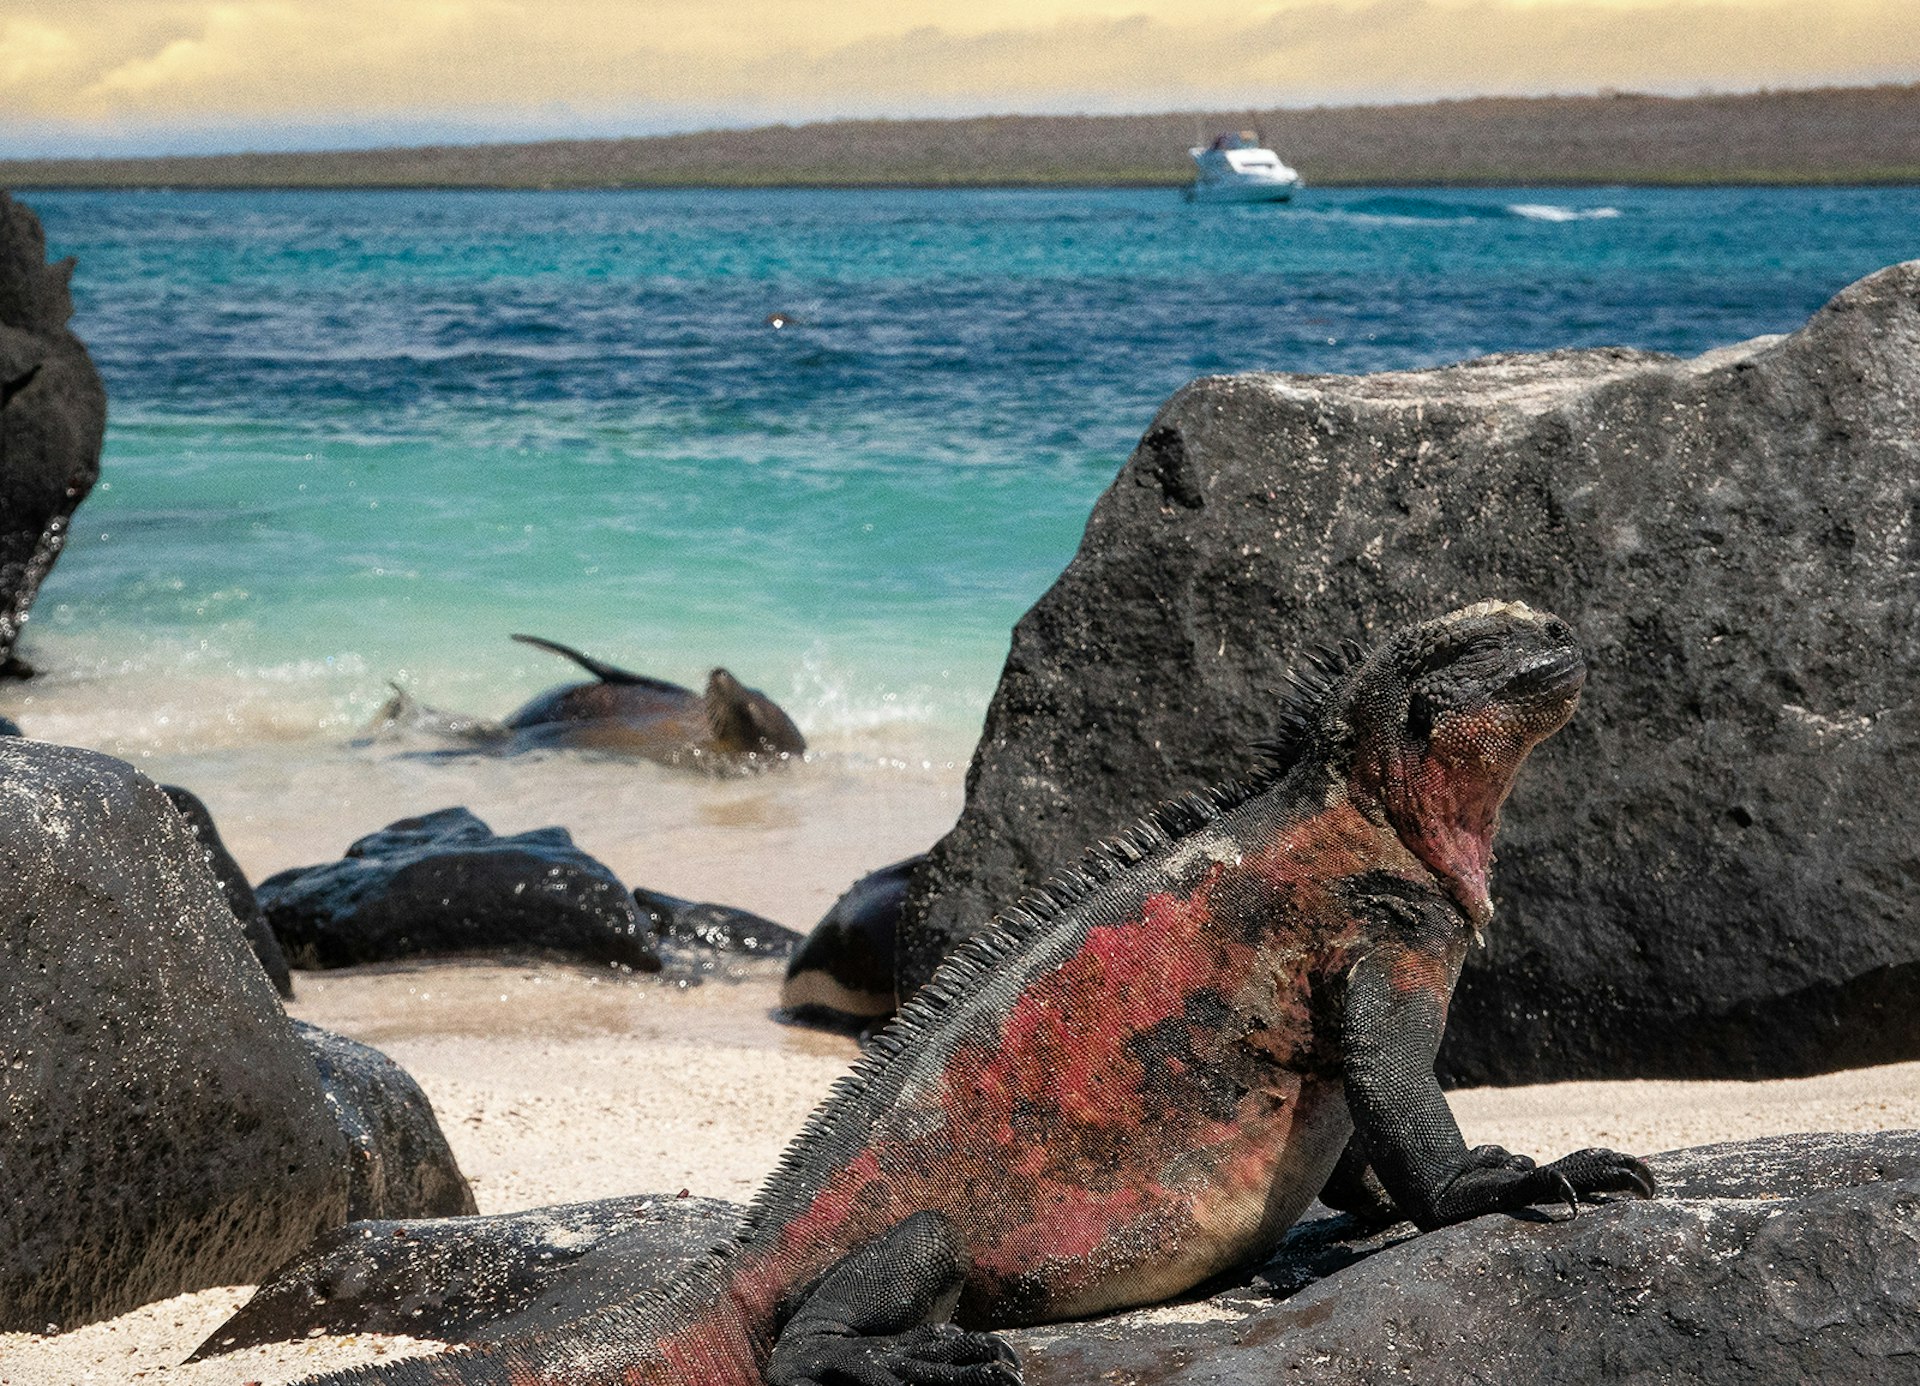 A red and black iguana sits on a dark grey rock in front of a clear blue shoreline. A seal plays in the surf.